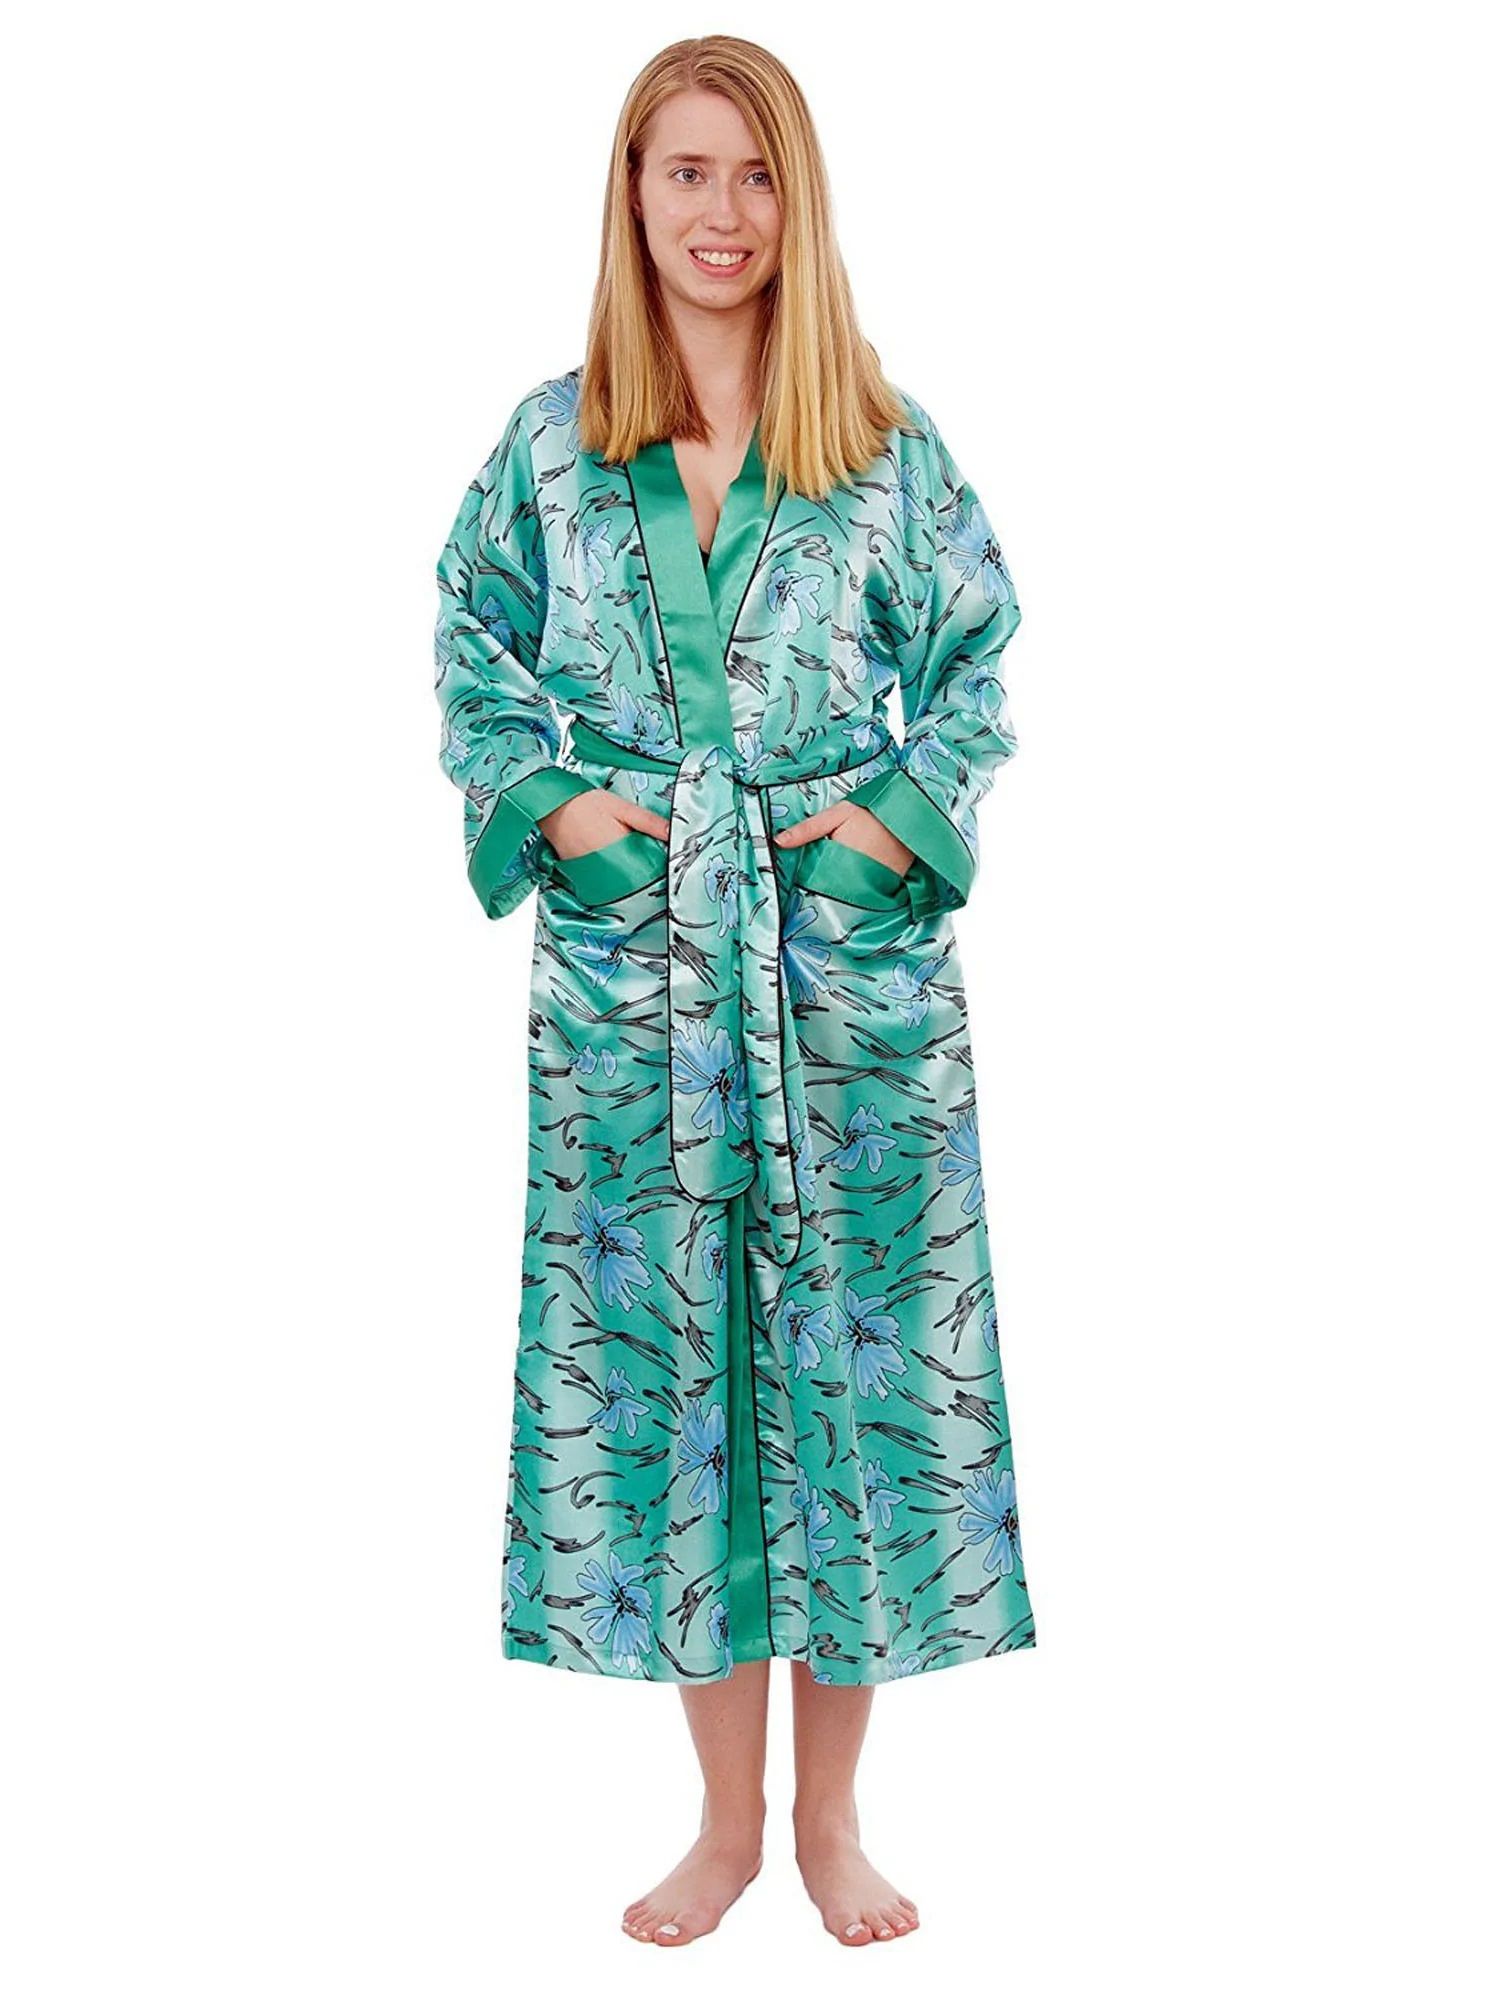 https://www.oshi.pk/images/variation/valerie-women-silky-comfy-satin-classic-long-robe-gown-featuring-contrast-trims--piping-nightwear-19139-302.jpg